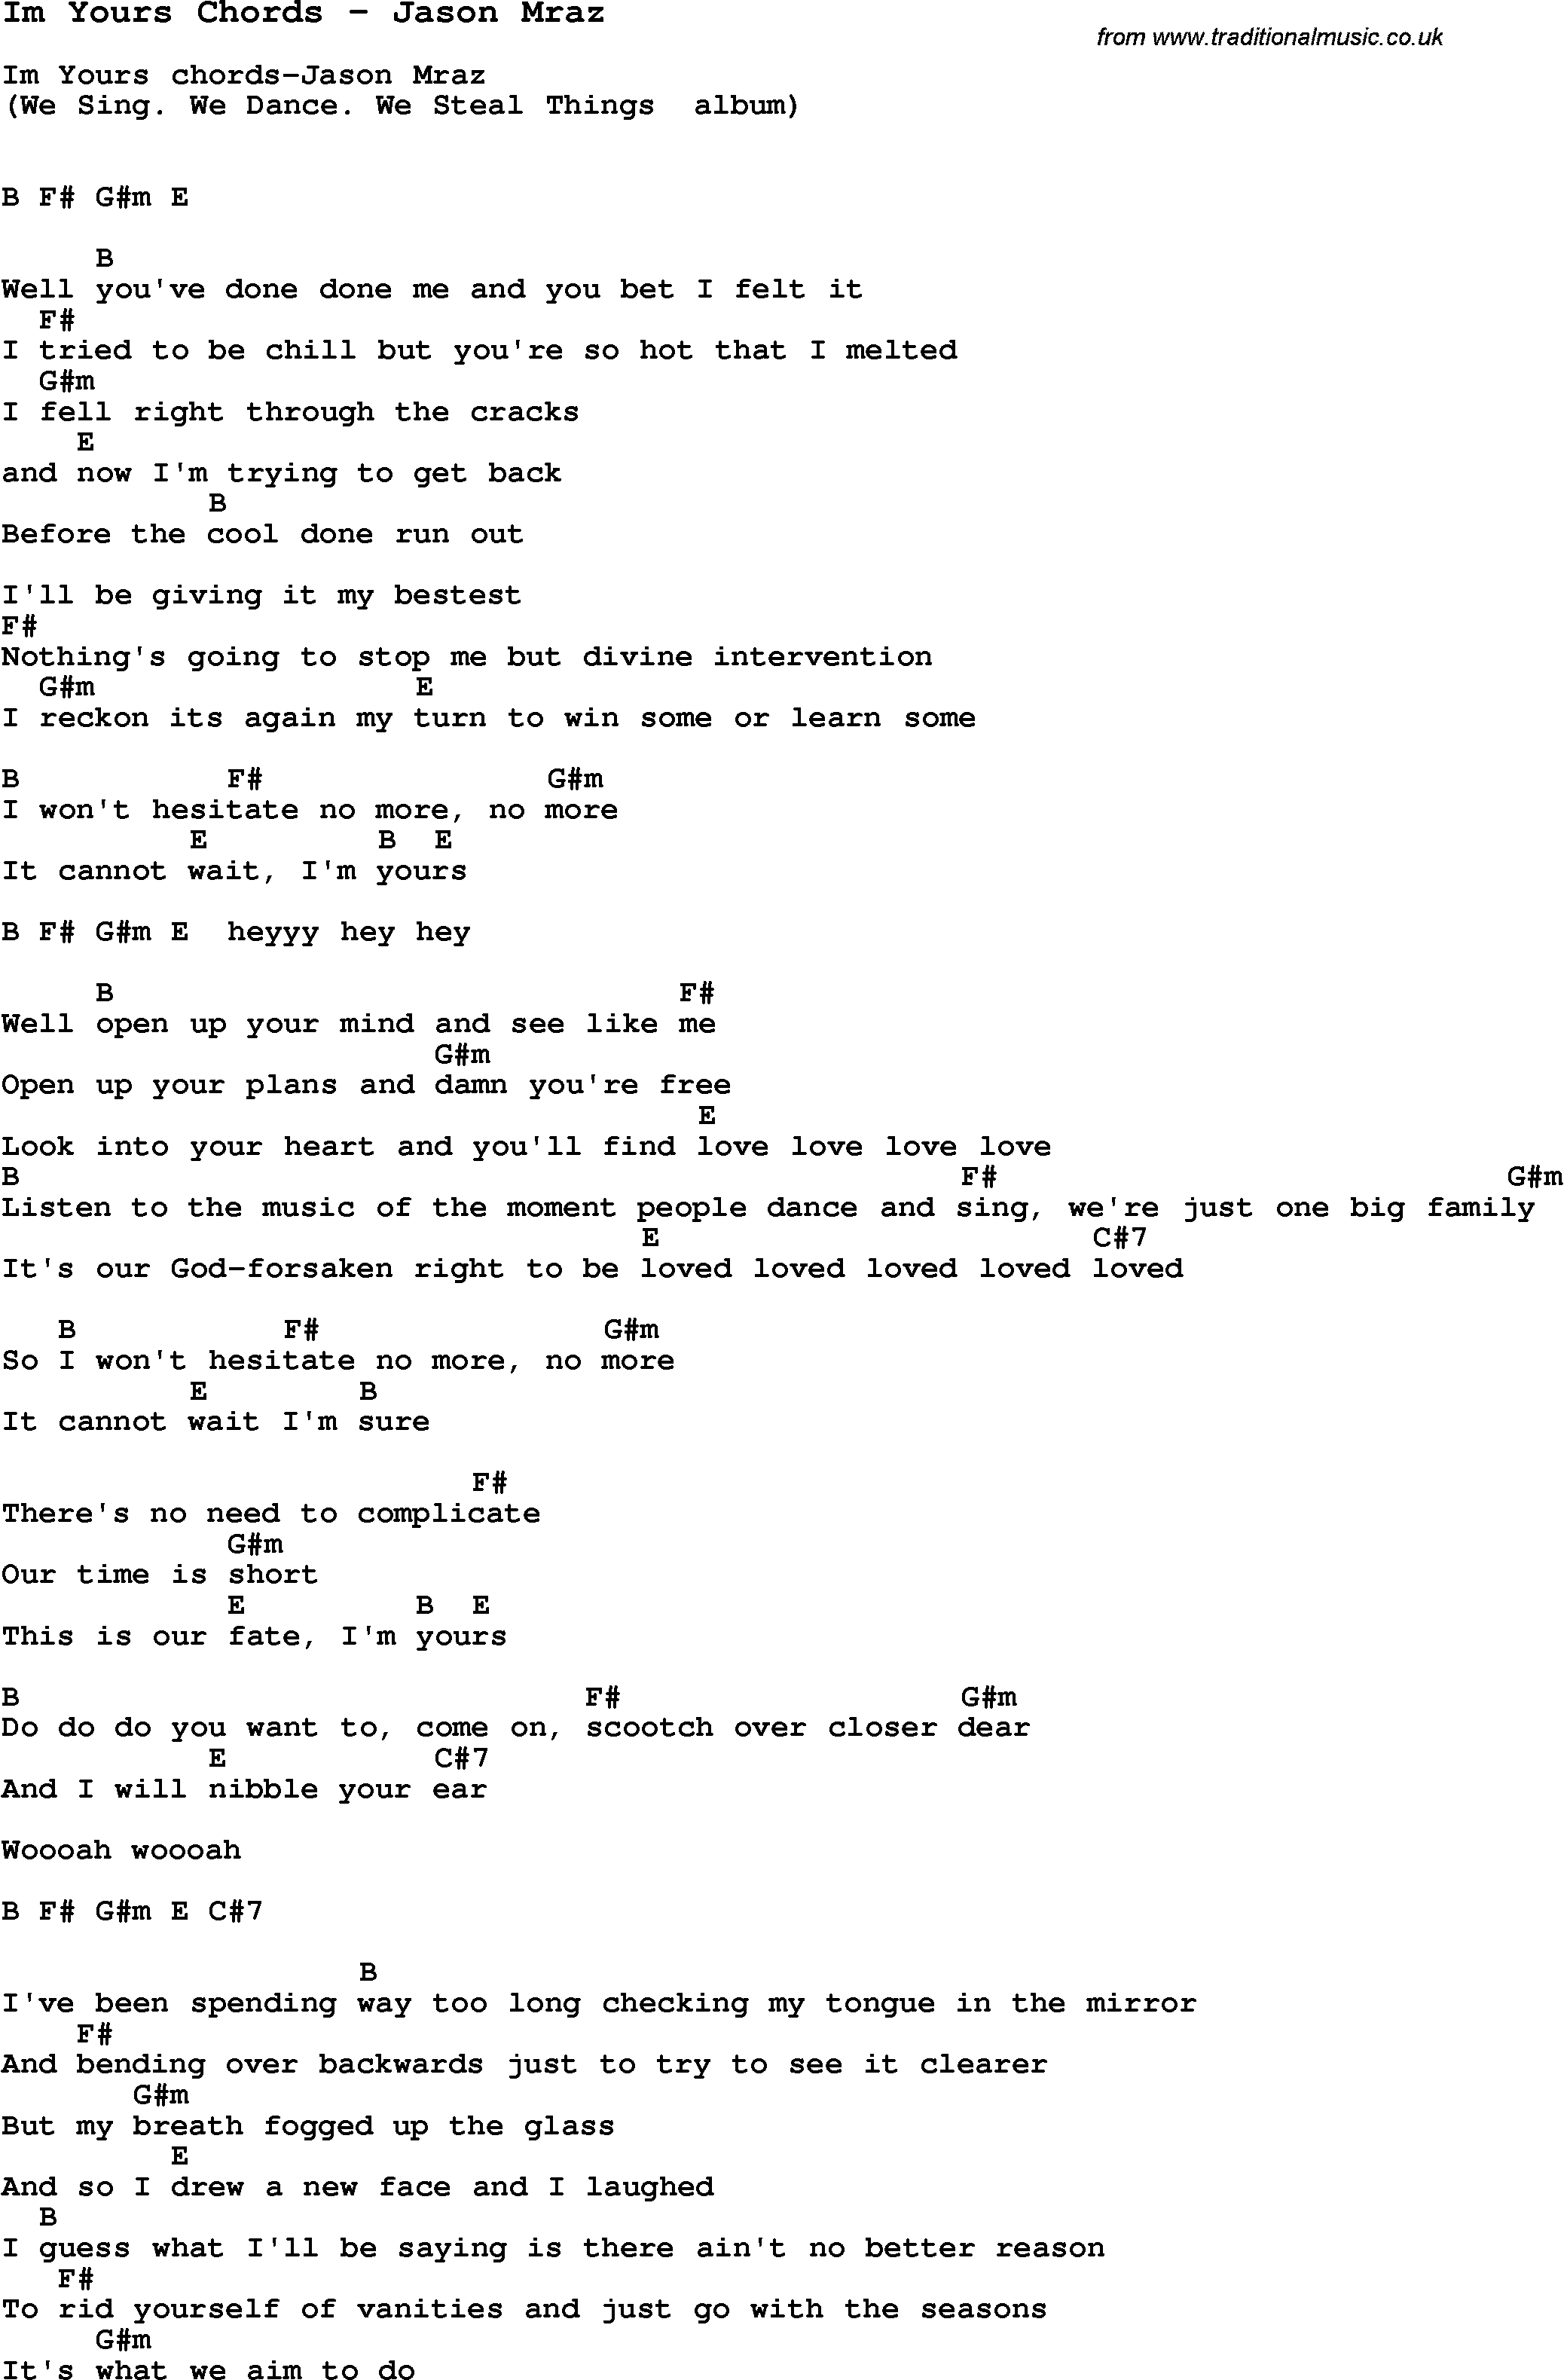 I M Yours Chords Song Im Yours Chords Jason Mraz Song Lyric For Vocal Performance